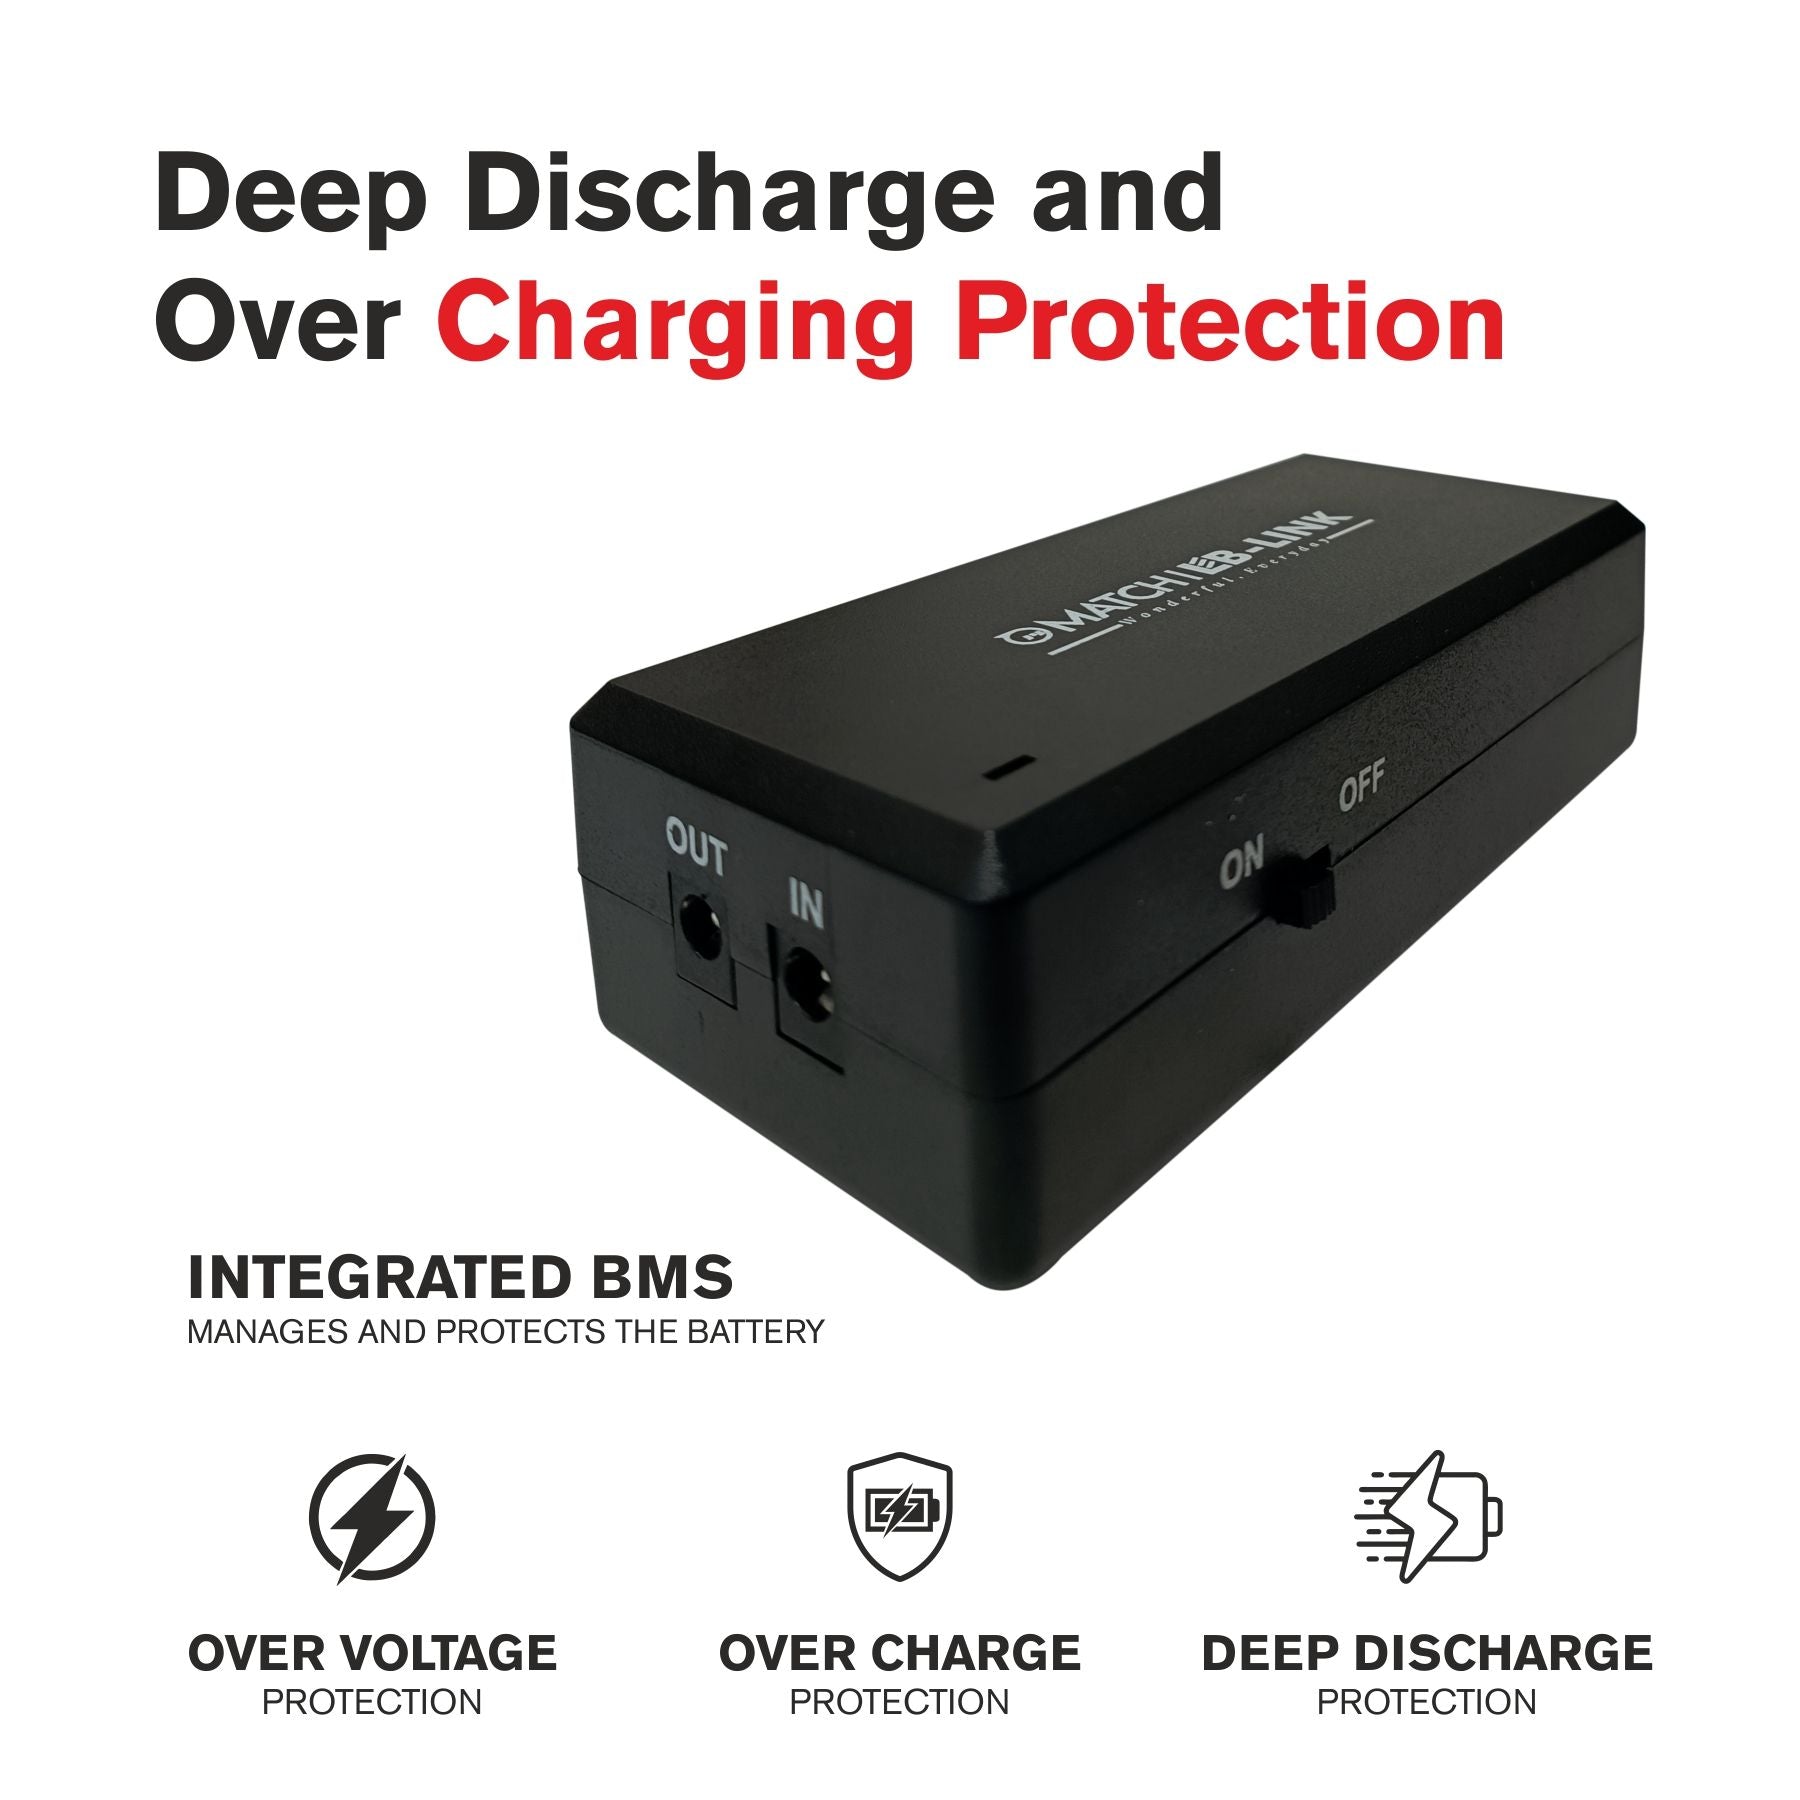 LB-Link mini UPS with deep discharge and over charging protection.